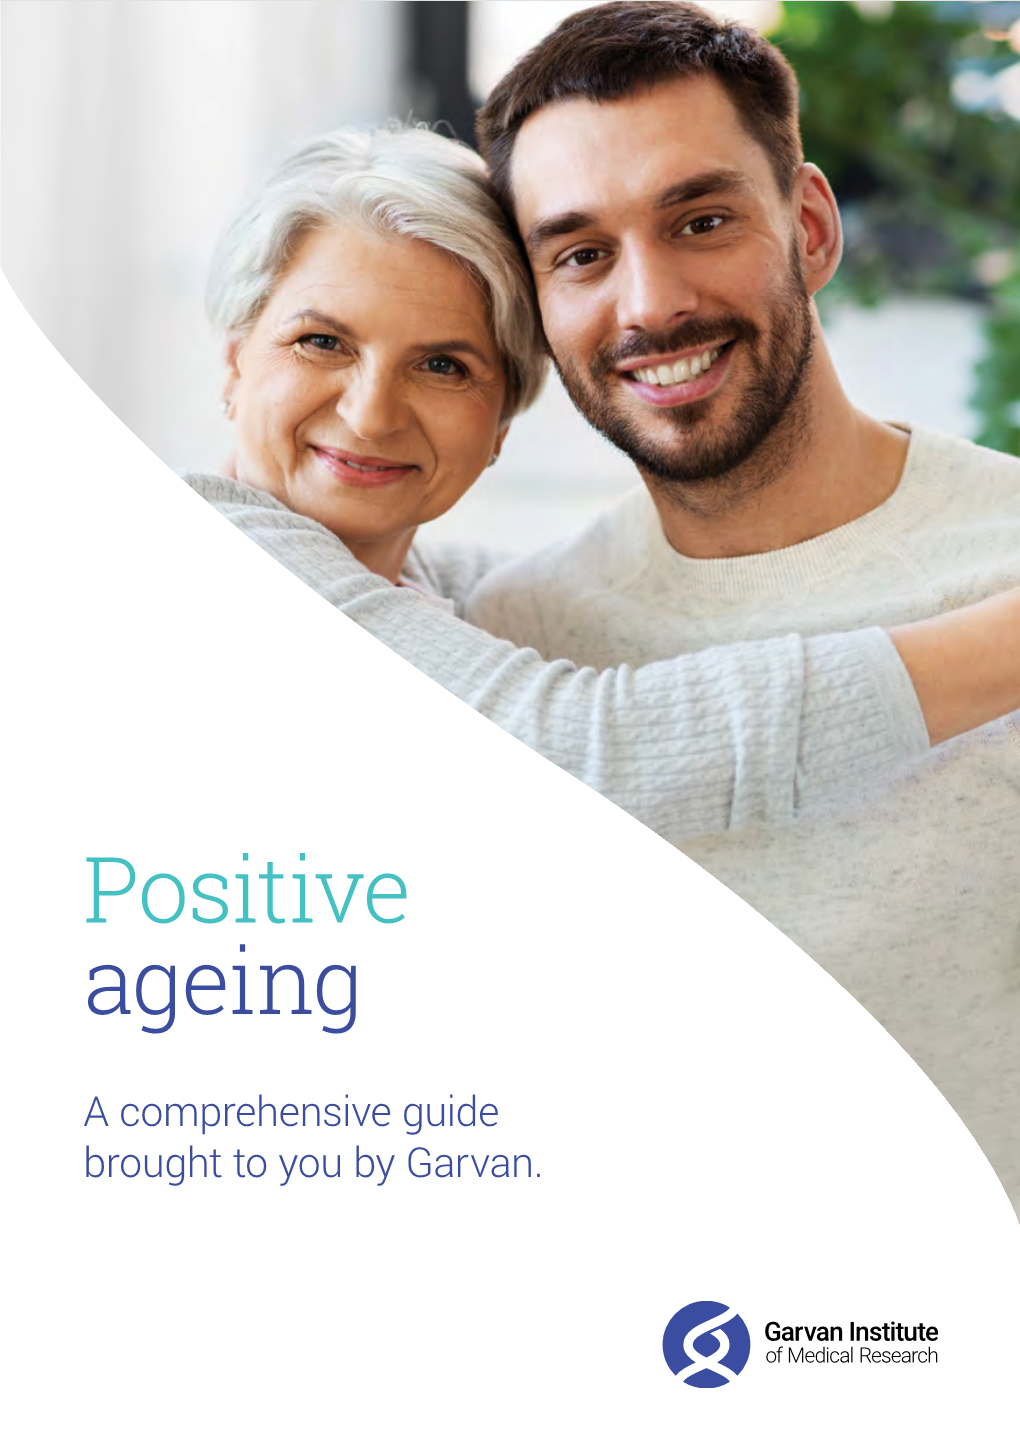 Garvan Institute's Guide to Positive Ageing